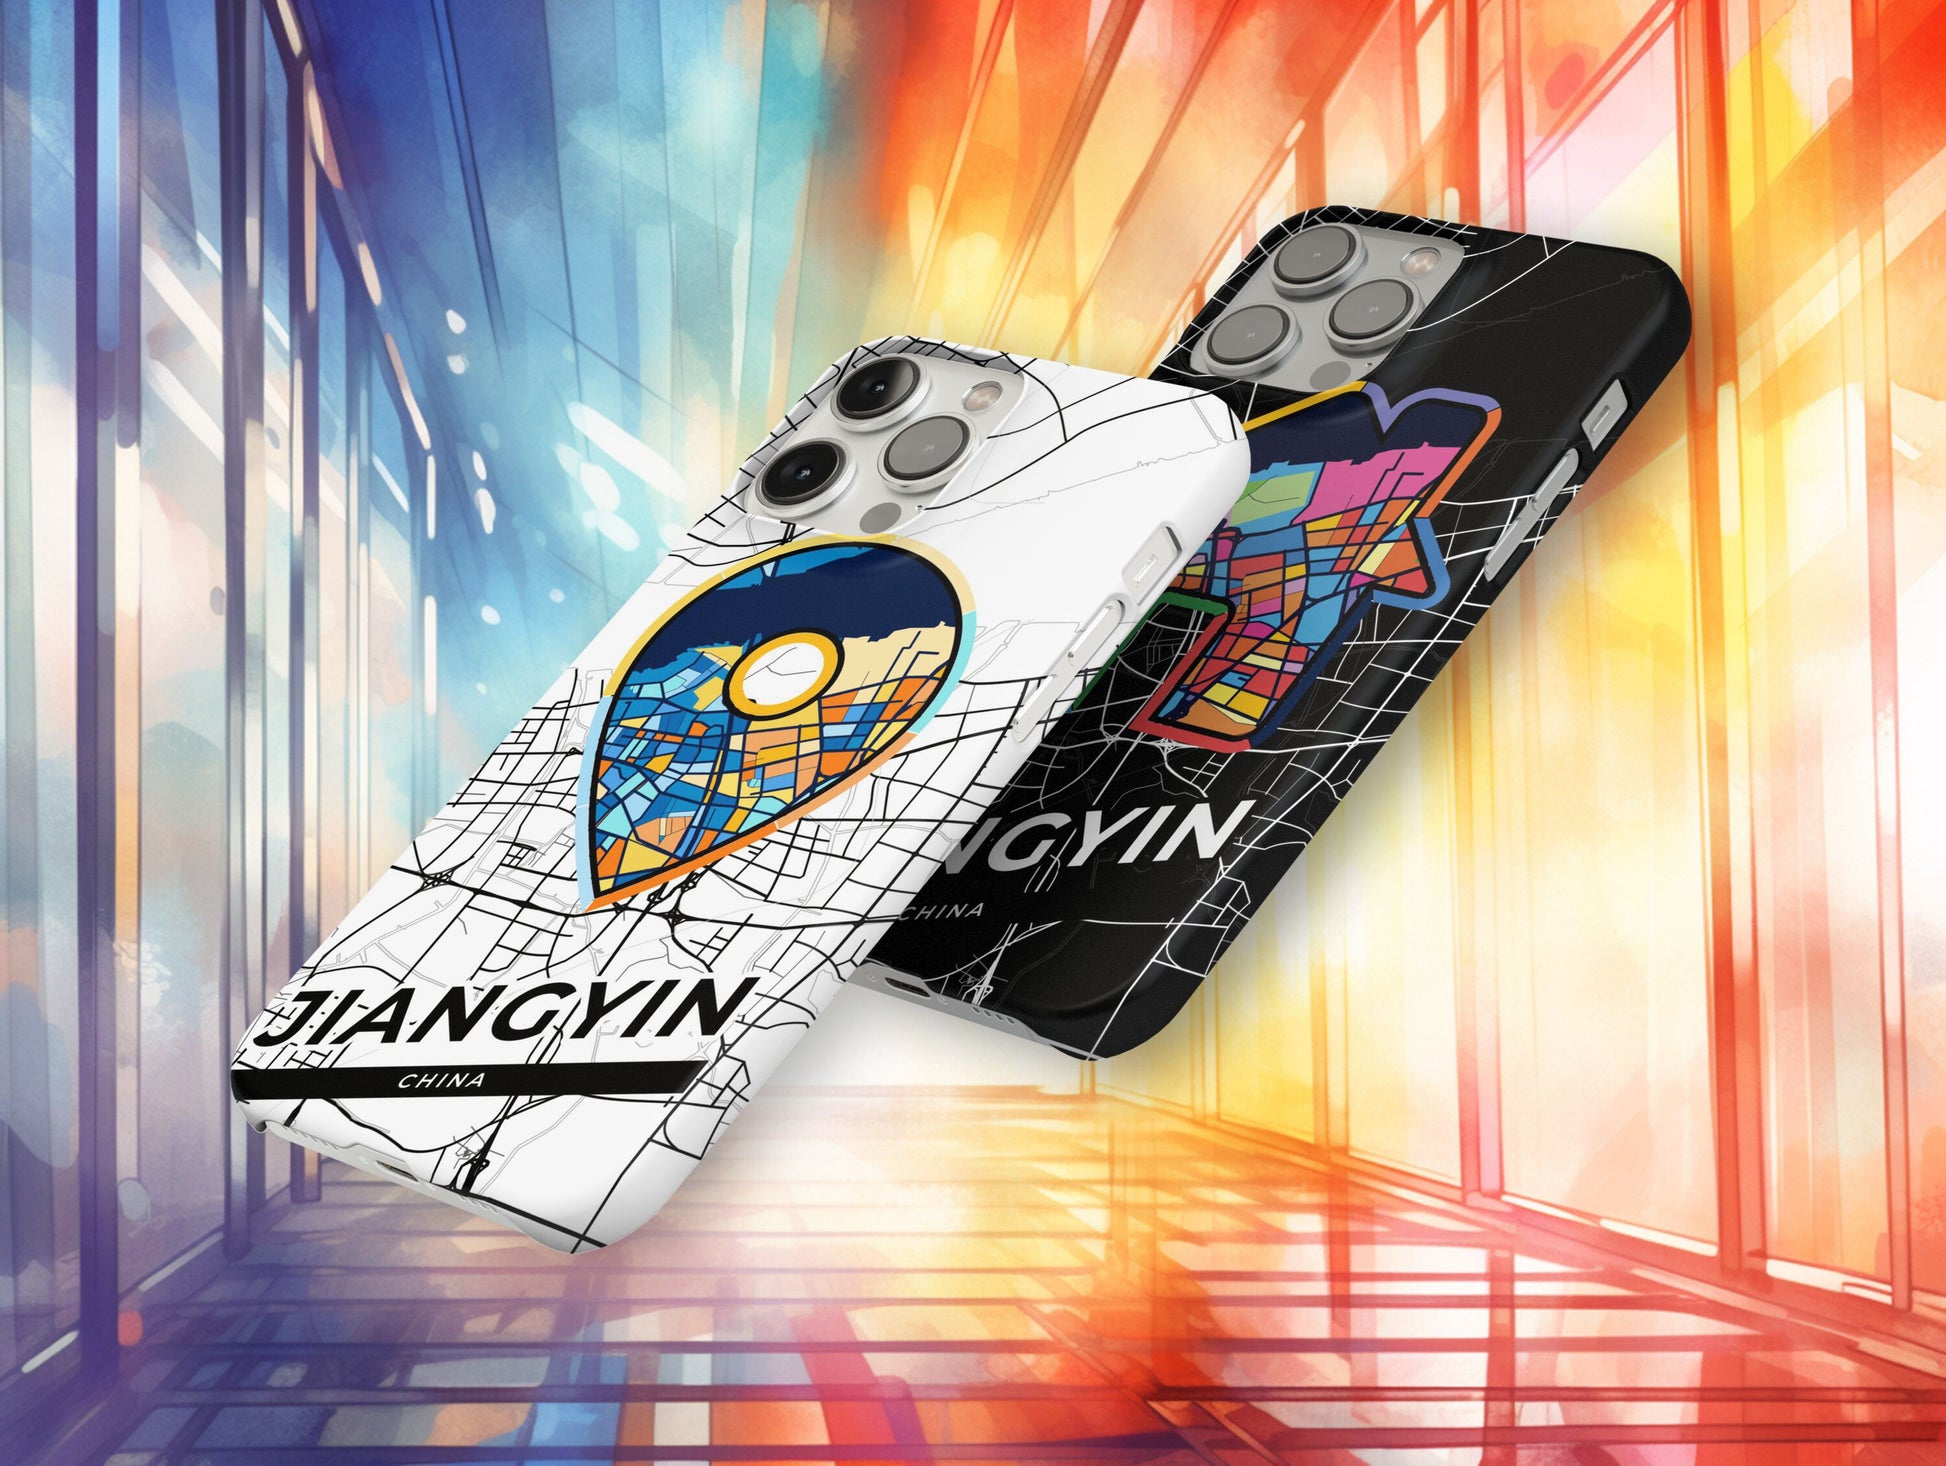 Jiangyin China slim phone case with colorful icon. Birthday, wedding or housewarming gift. Couple match cases.